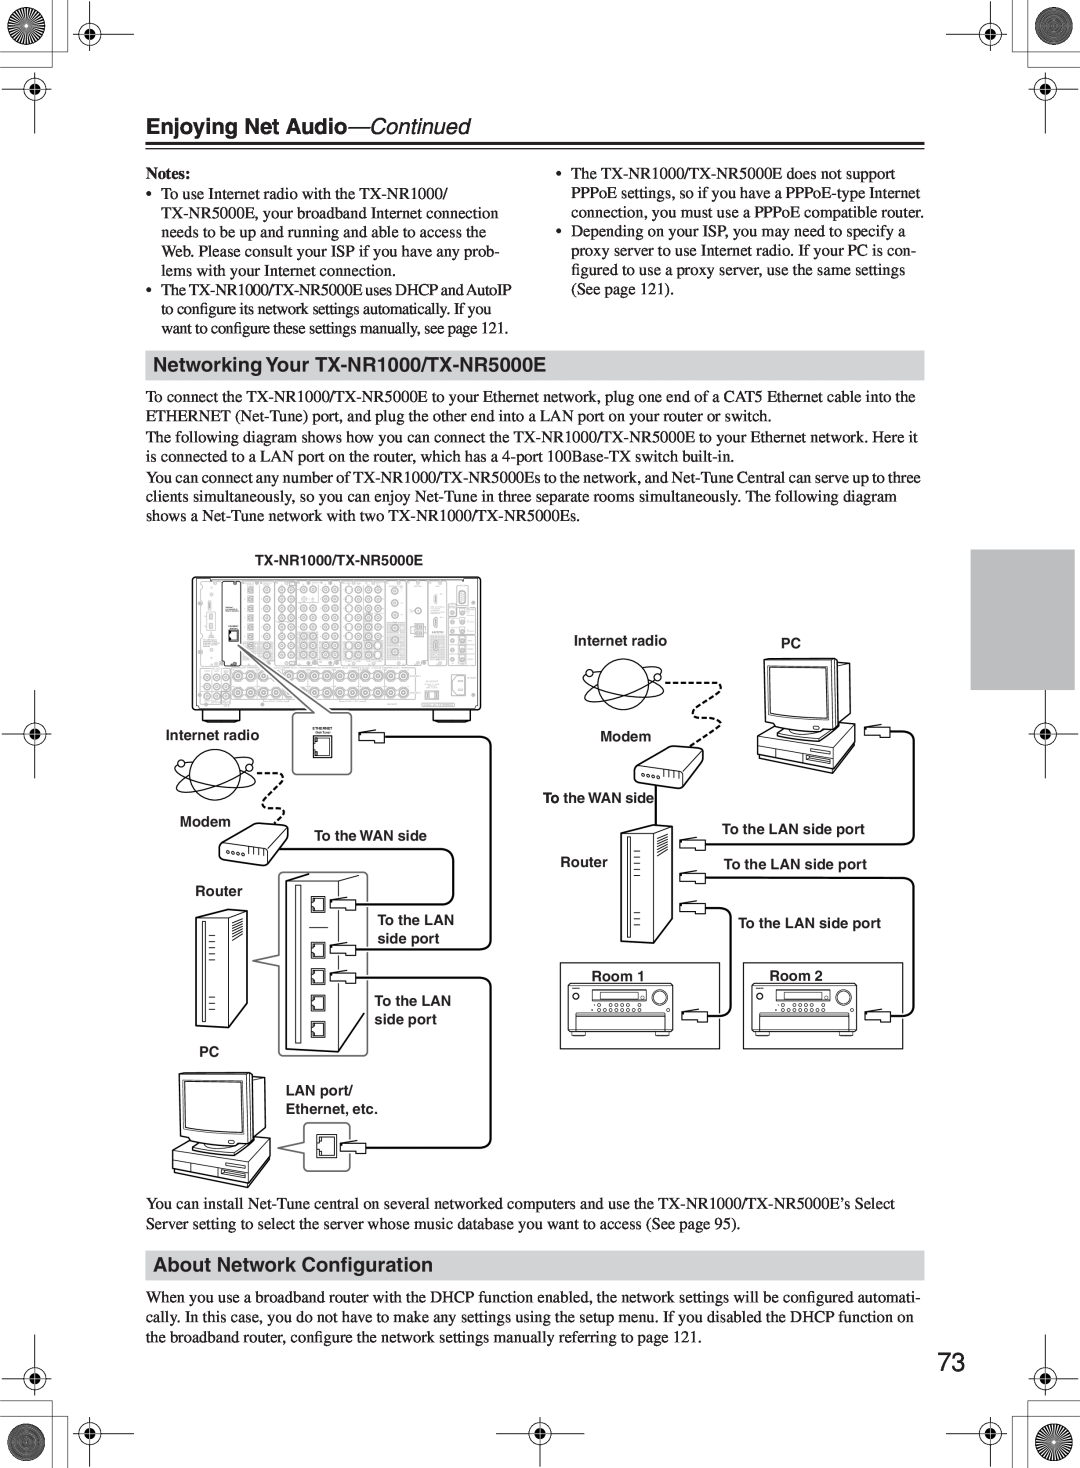 Onkyo Enjoying Net Audio—Continued, Networking Your TX-NR1000/TX-NR5000E, About Network Conﬁguration, Notes 